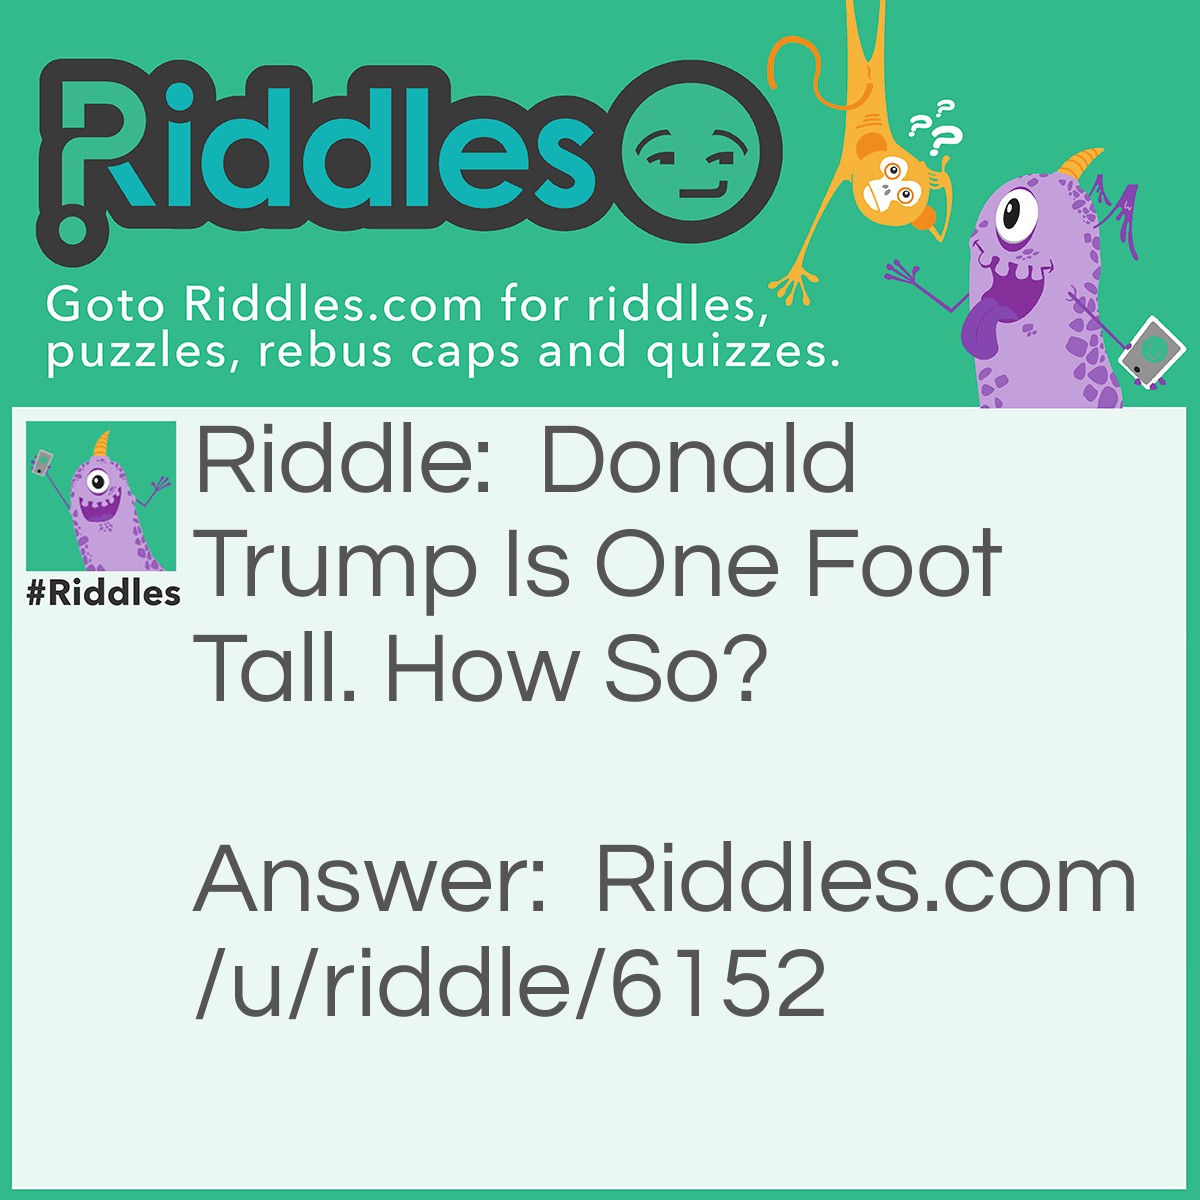 Riddle: Donald Trump Is One Foot Tall. How So? Answer: Because He Is A Ruler, And Ruler Is One Foot Tall.